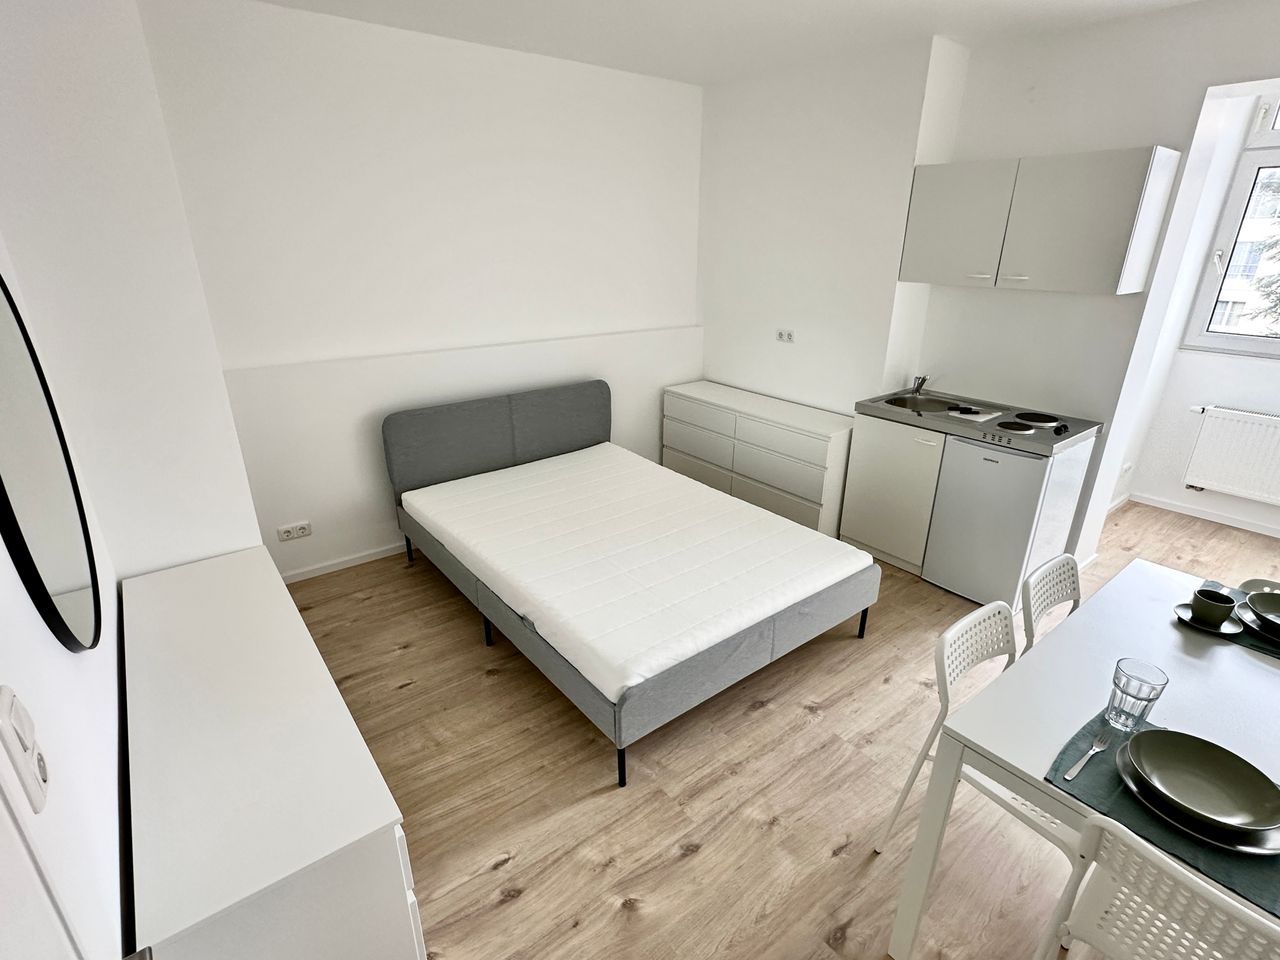 New and furnished Studio in the City Center